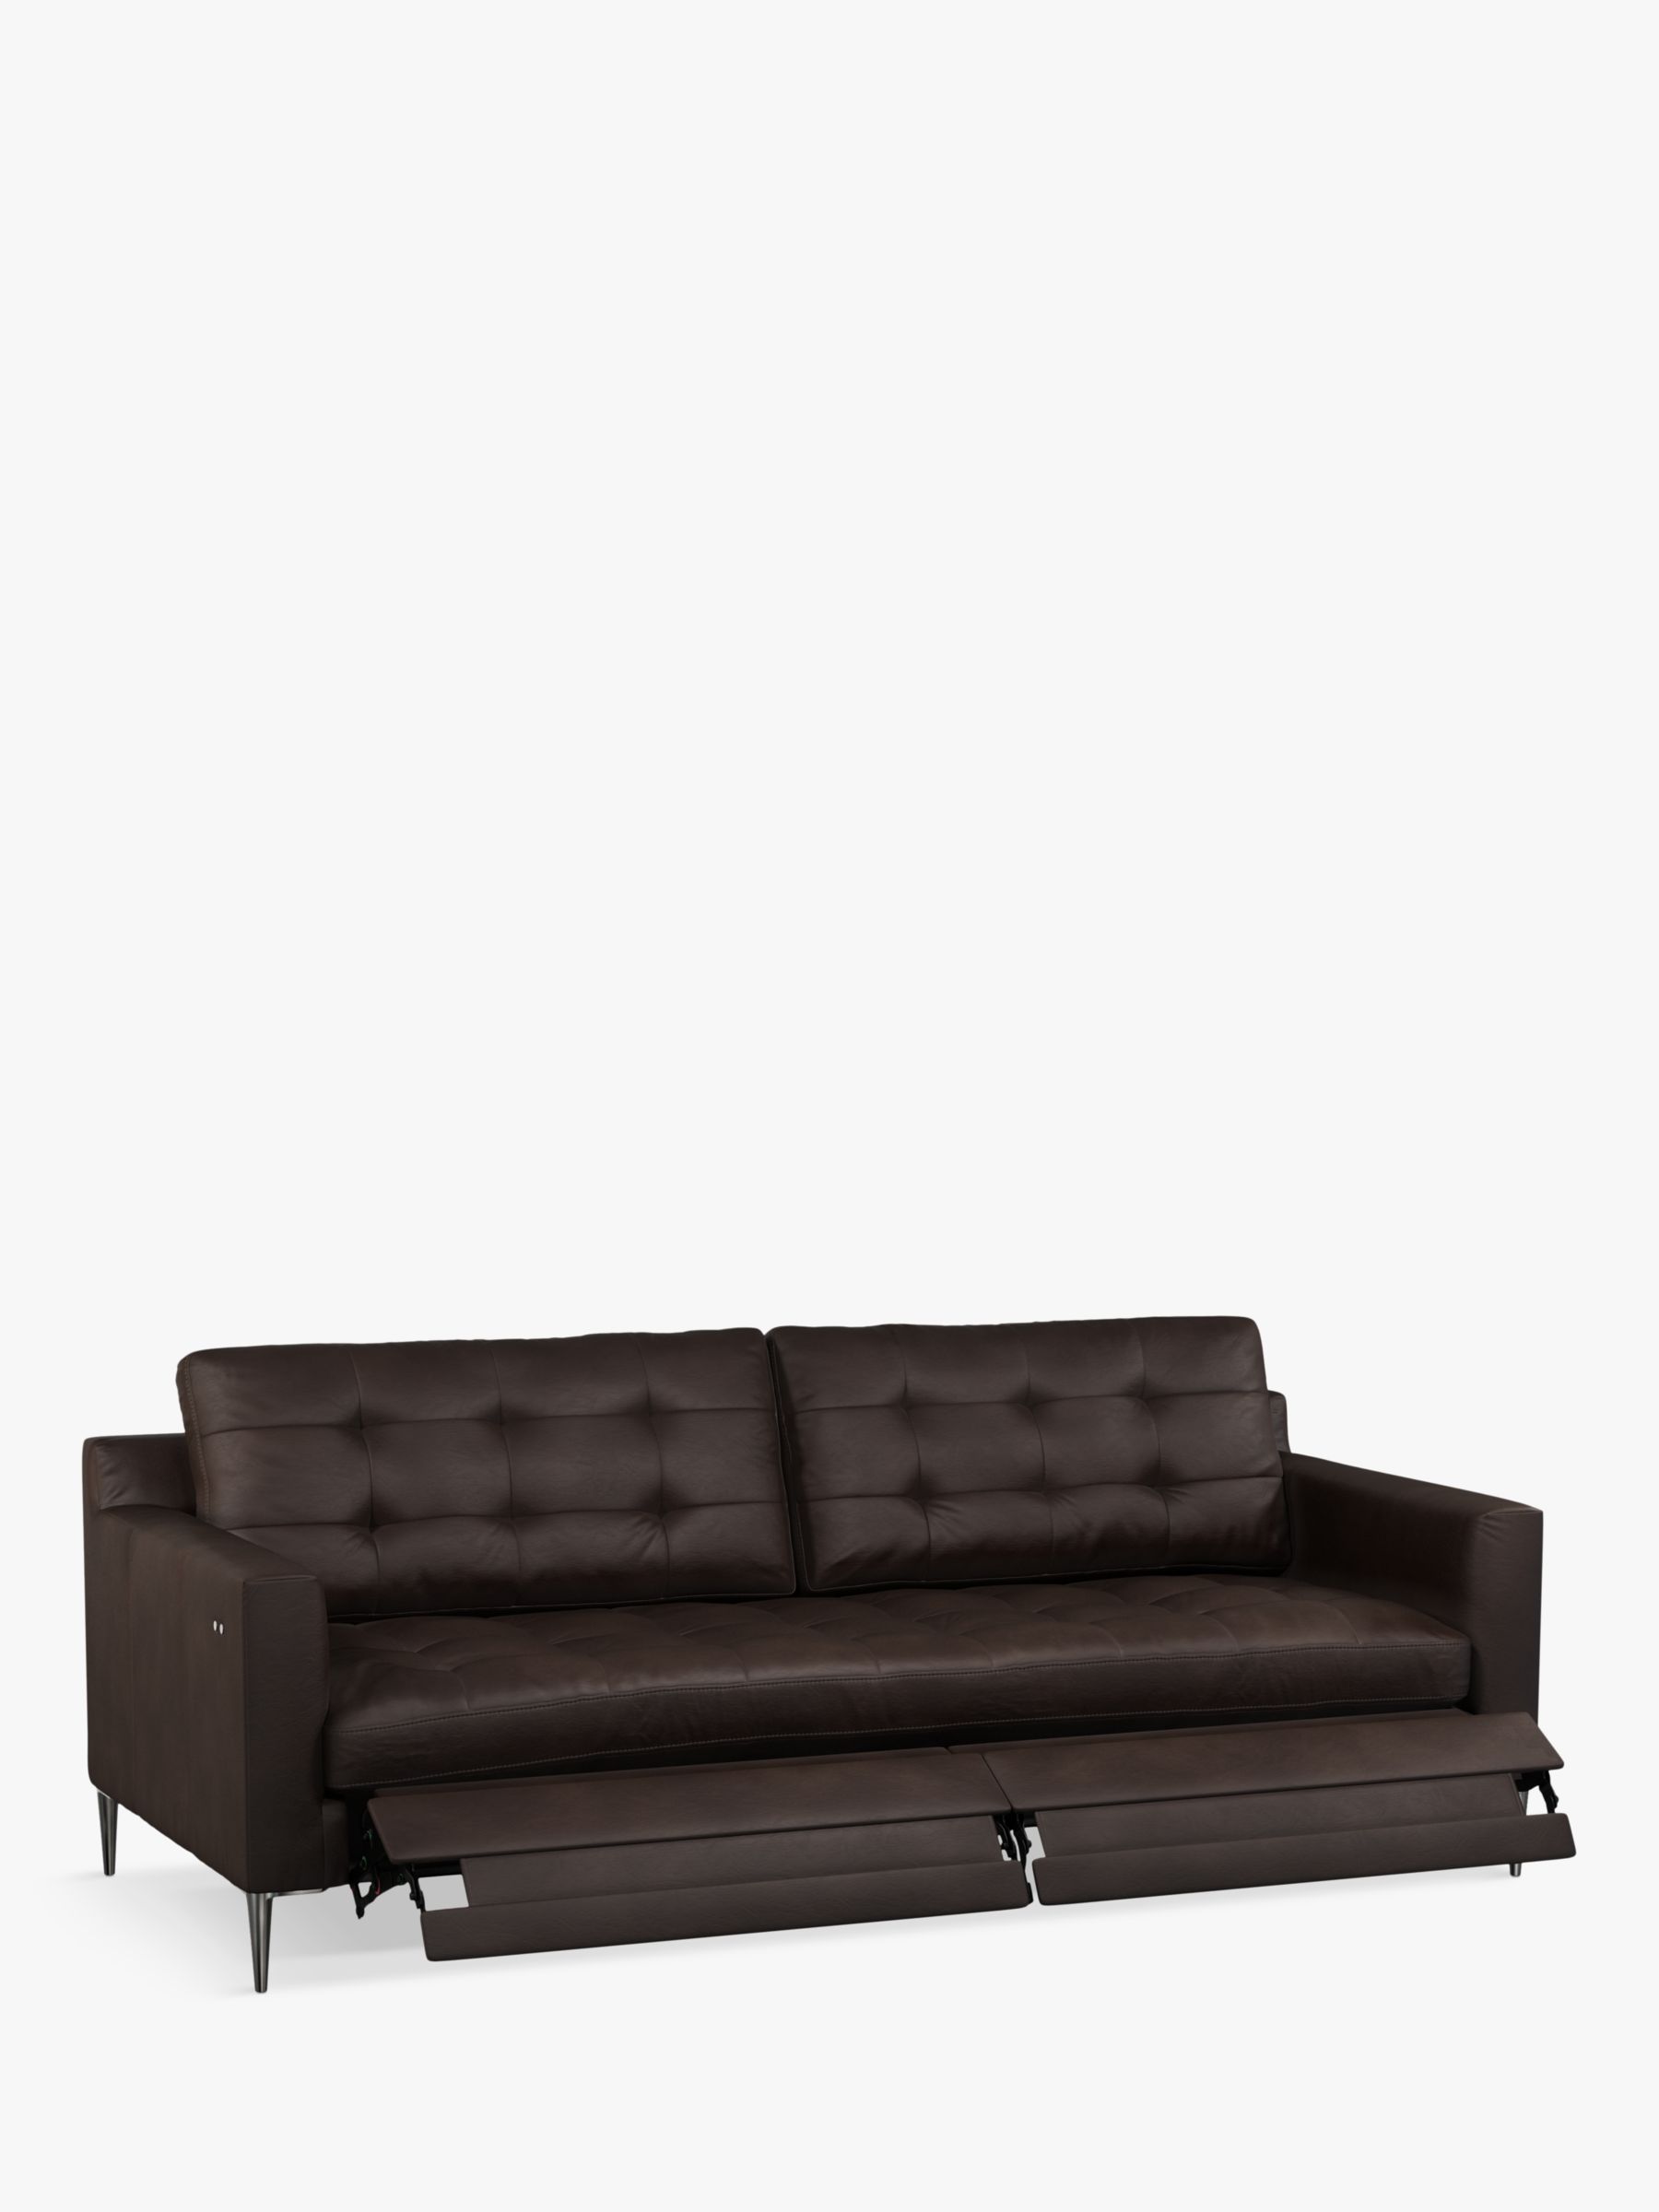 Photo of John lewis draper motion large 3 seater leather sofa with footrest mechanism metal leg